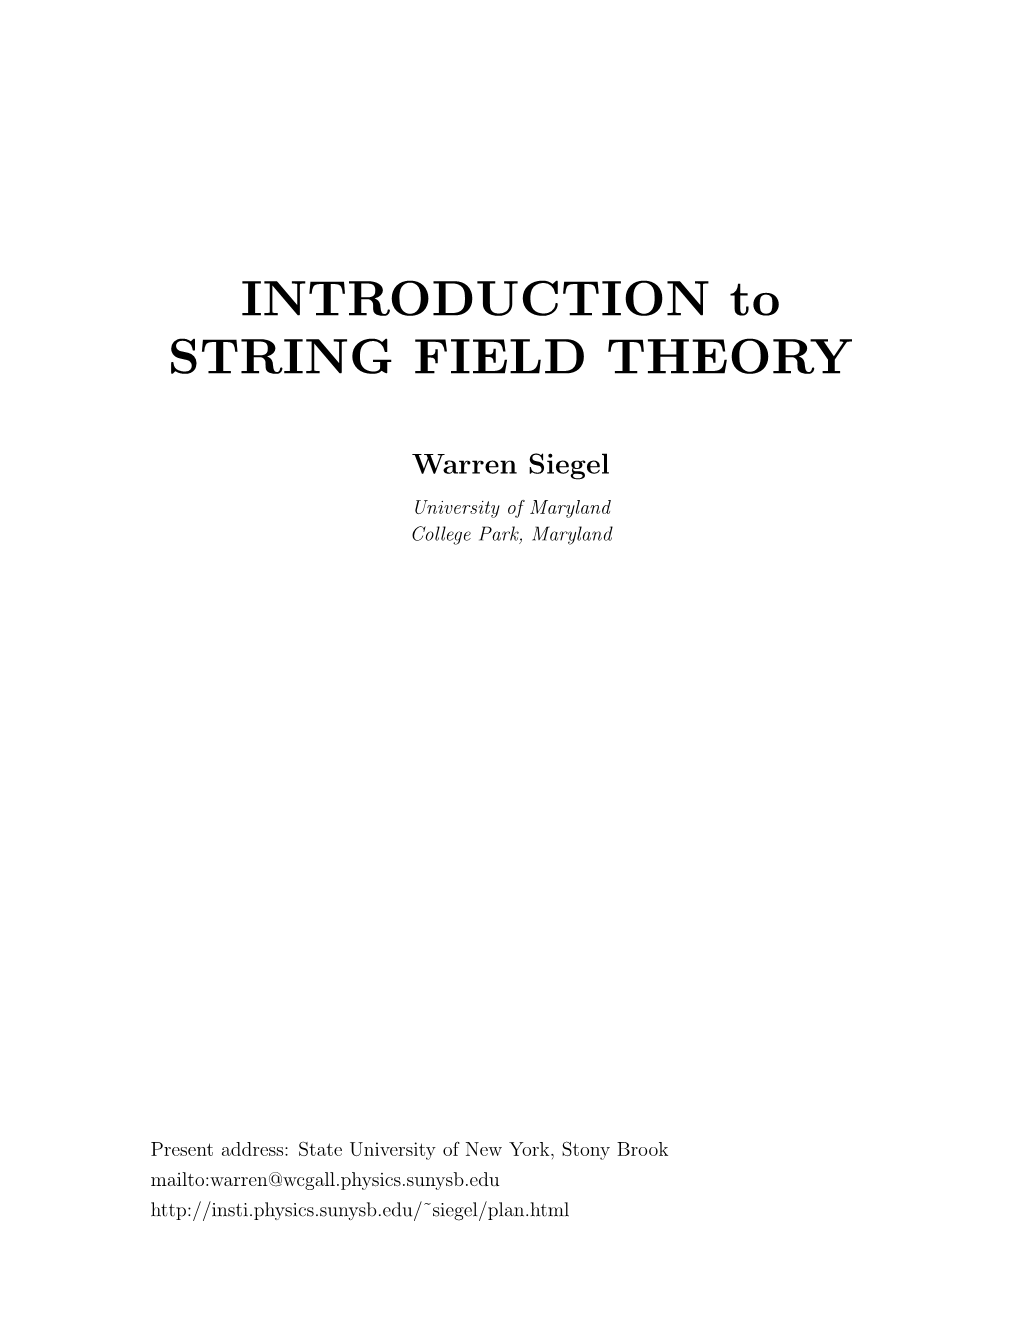 INTRODUCTION to STRING FIELD THEORY